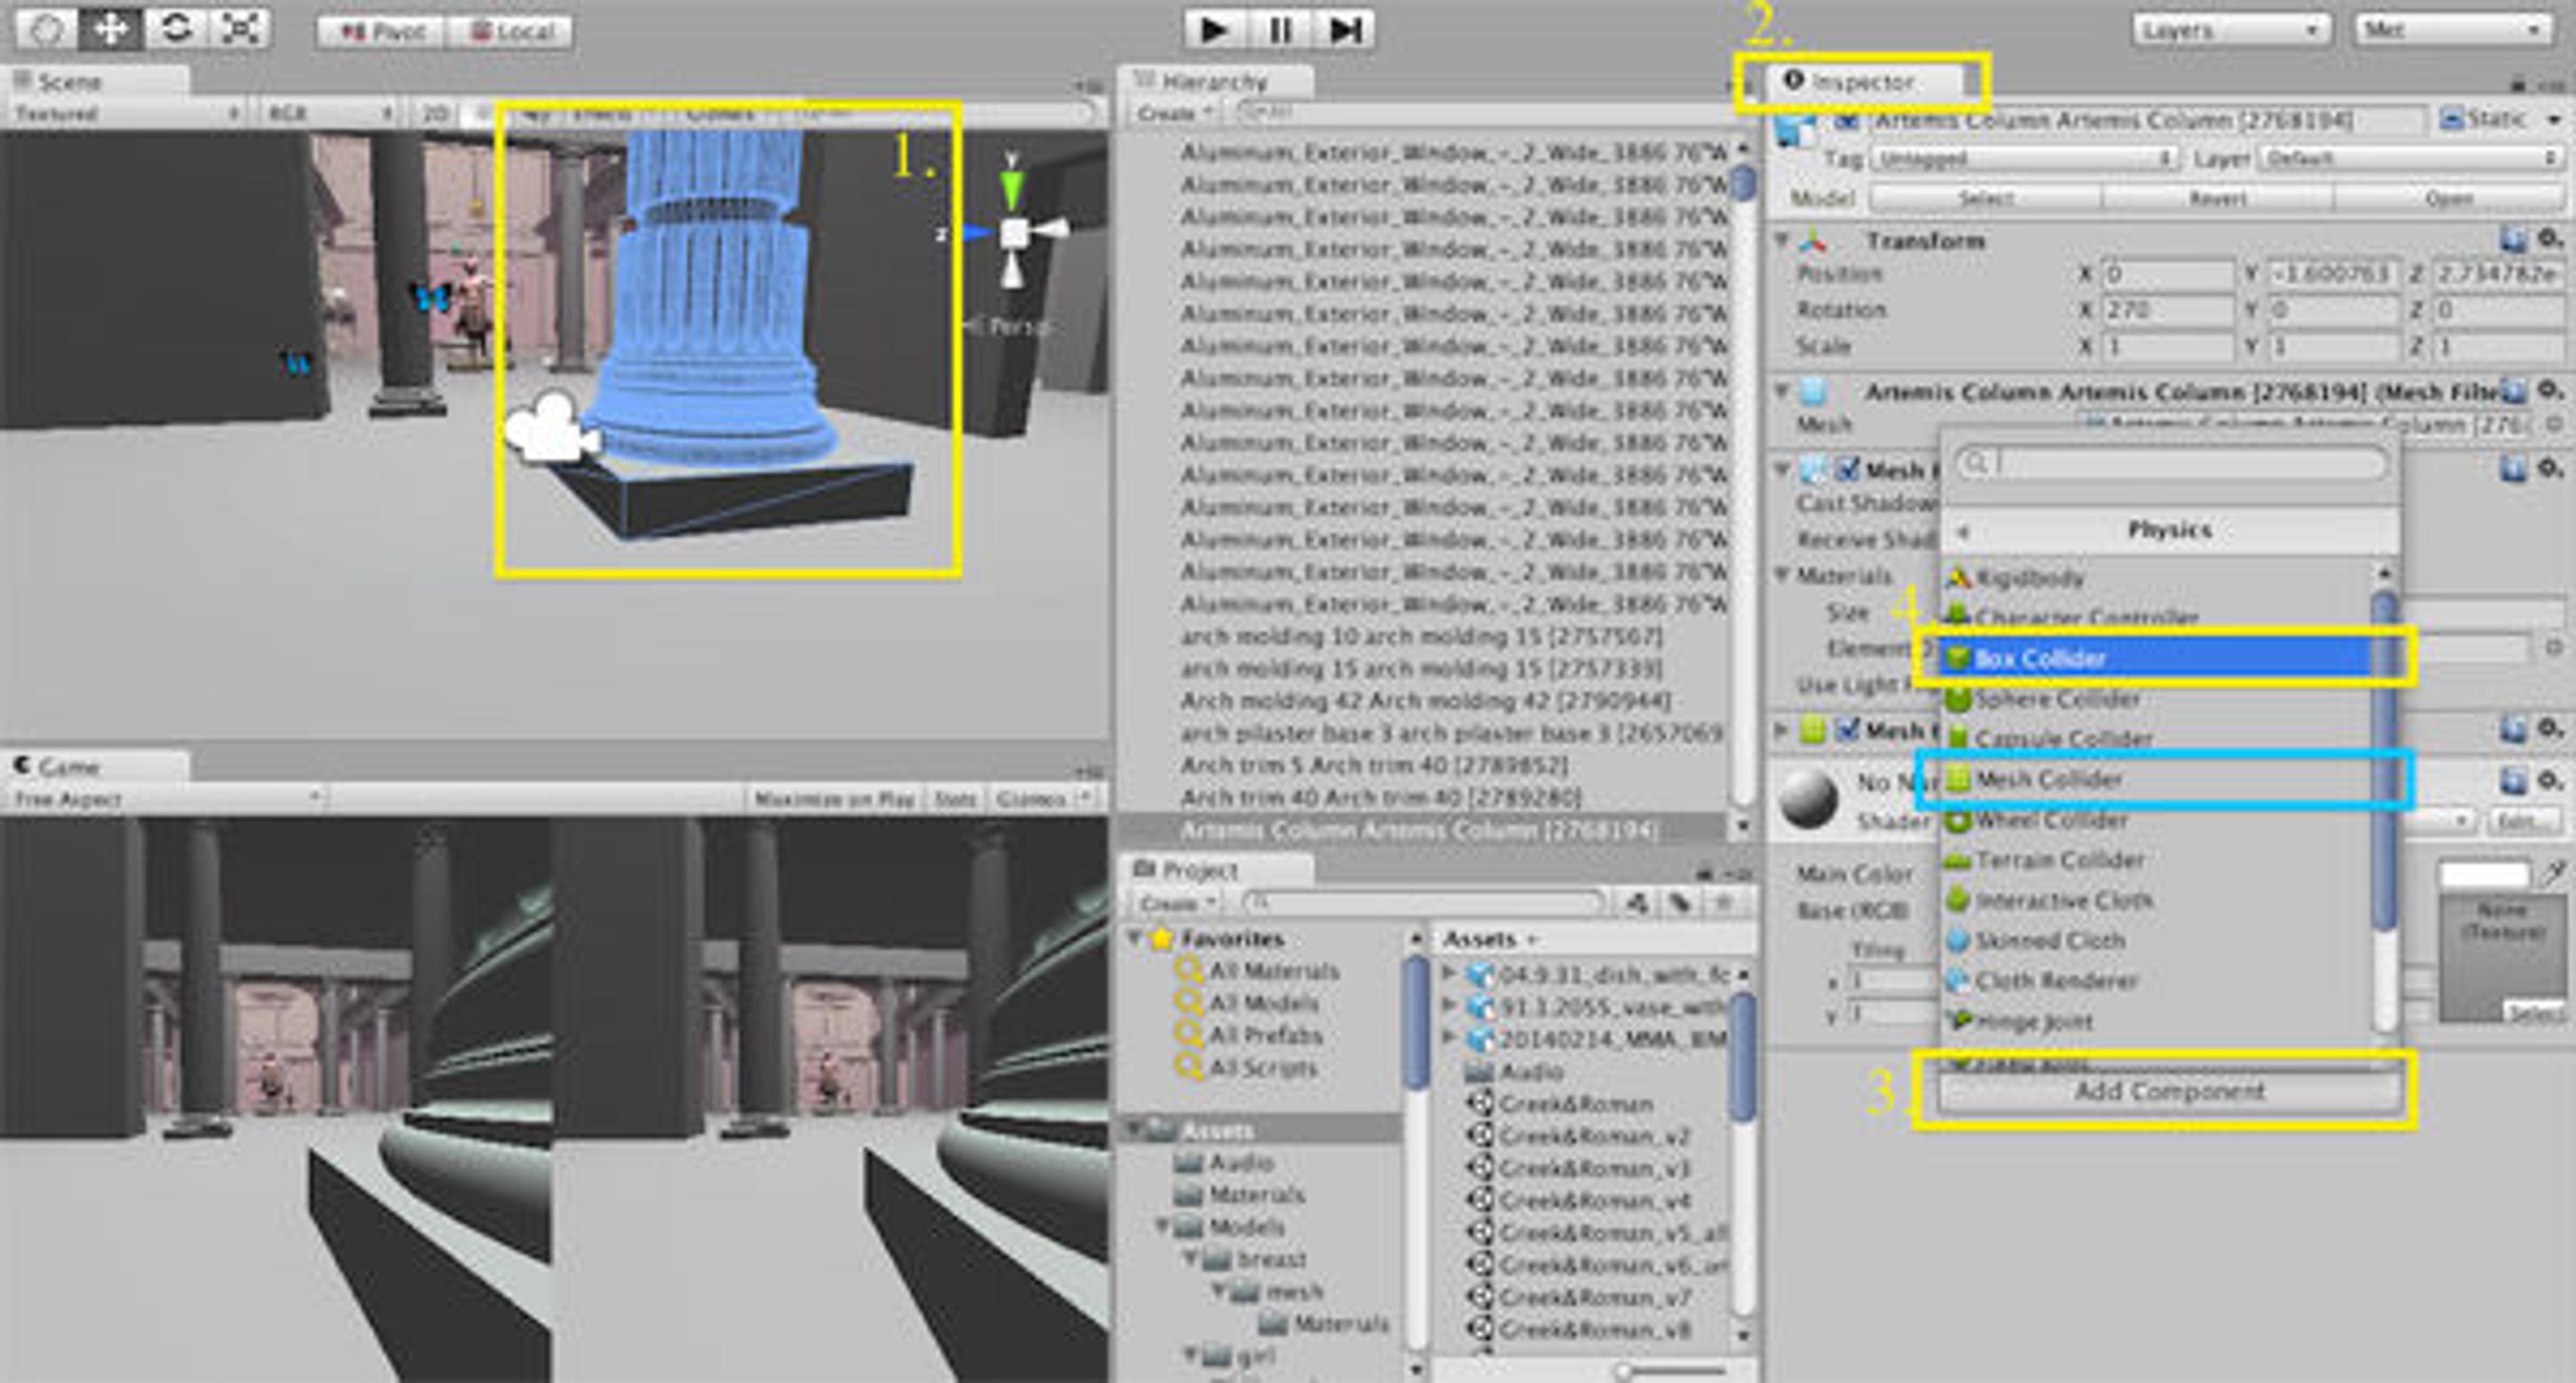 Screen shot showing the process for importing BIM 3D models into Unity